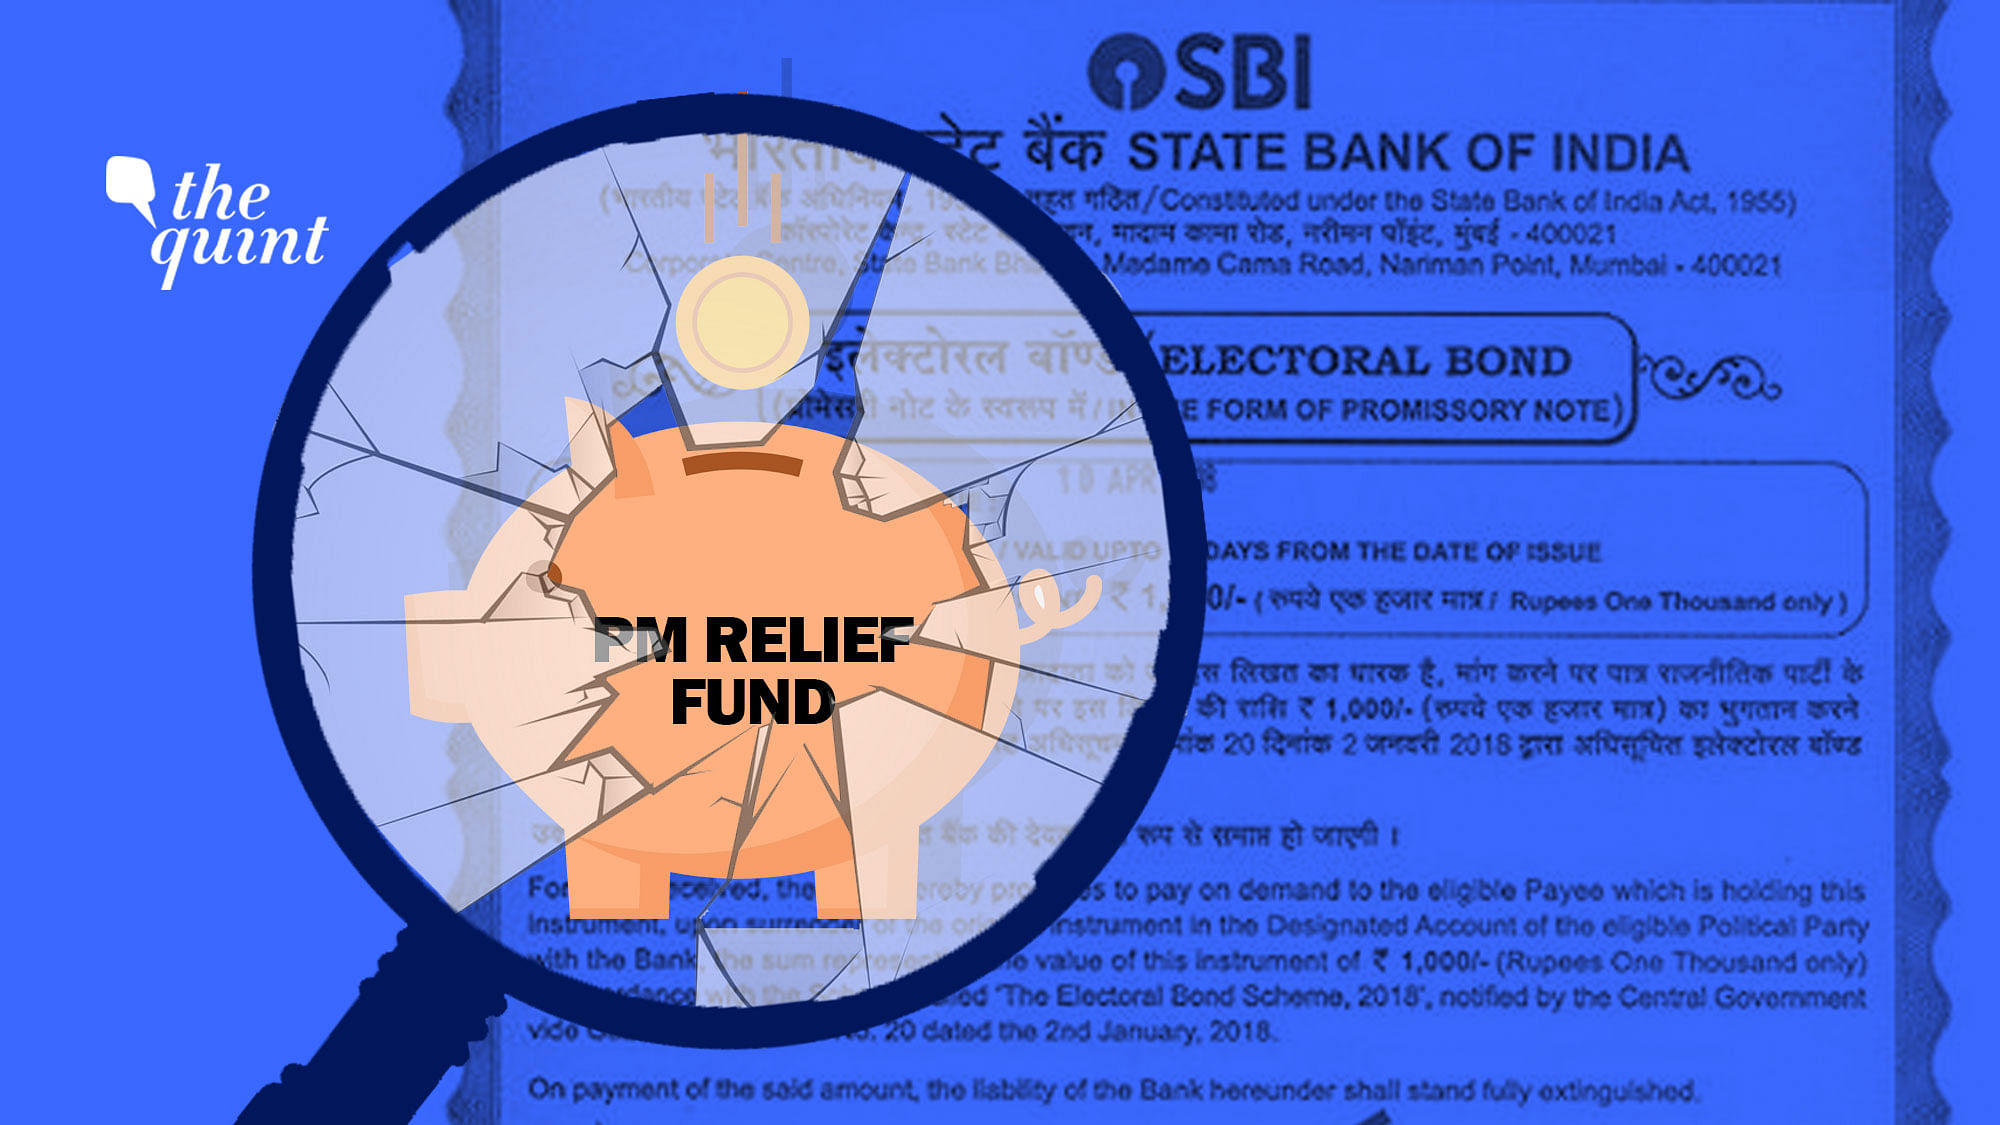 Why Prime Minister National Relief Fund doesn’t come under RTI when it is getting not encashed electoral bonds fund?